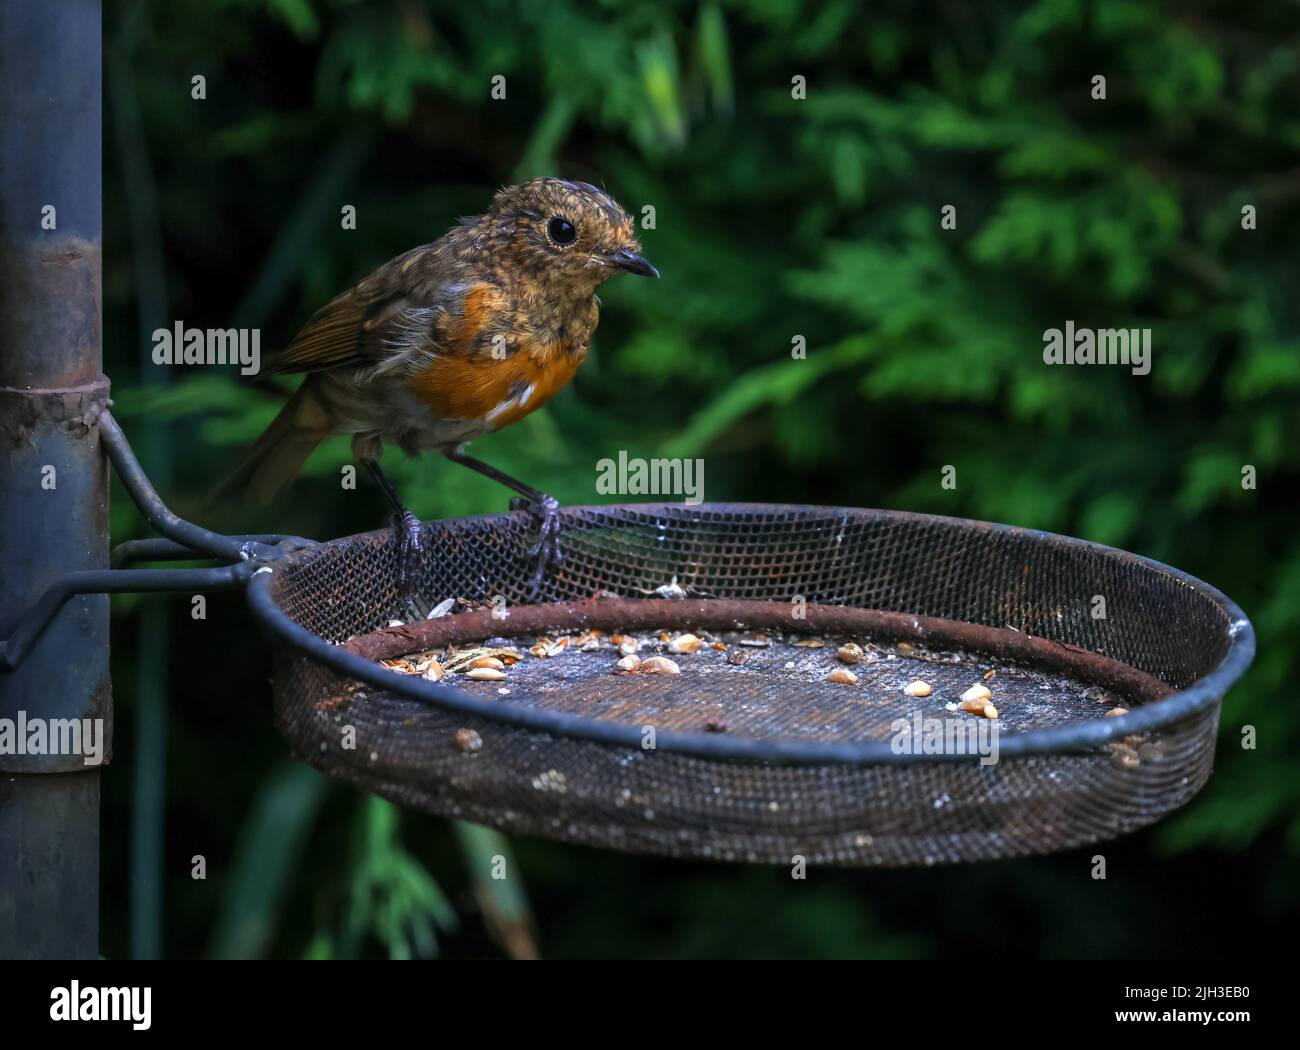 Juvenile robin bird 'Erithacus rubecula', front bib feathers turning red, perched on seed feed basket in garden. Dublin, Ireland Stock Photo